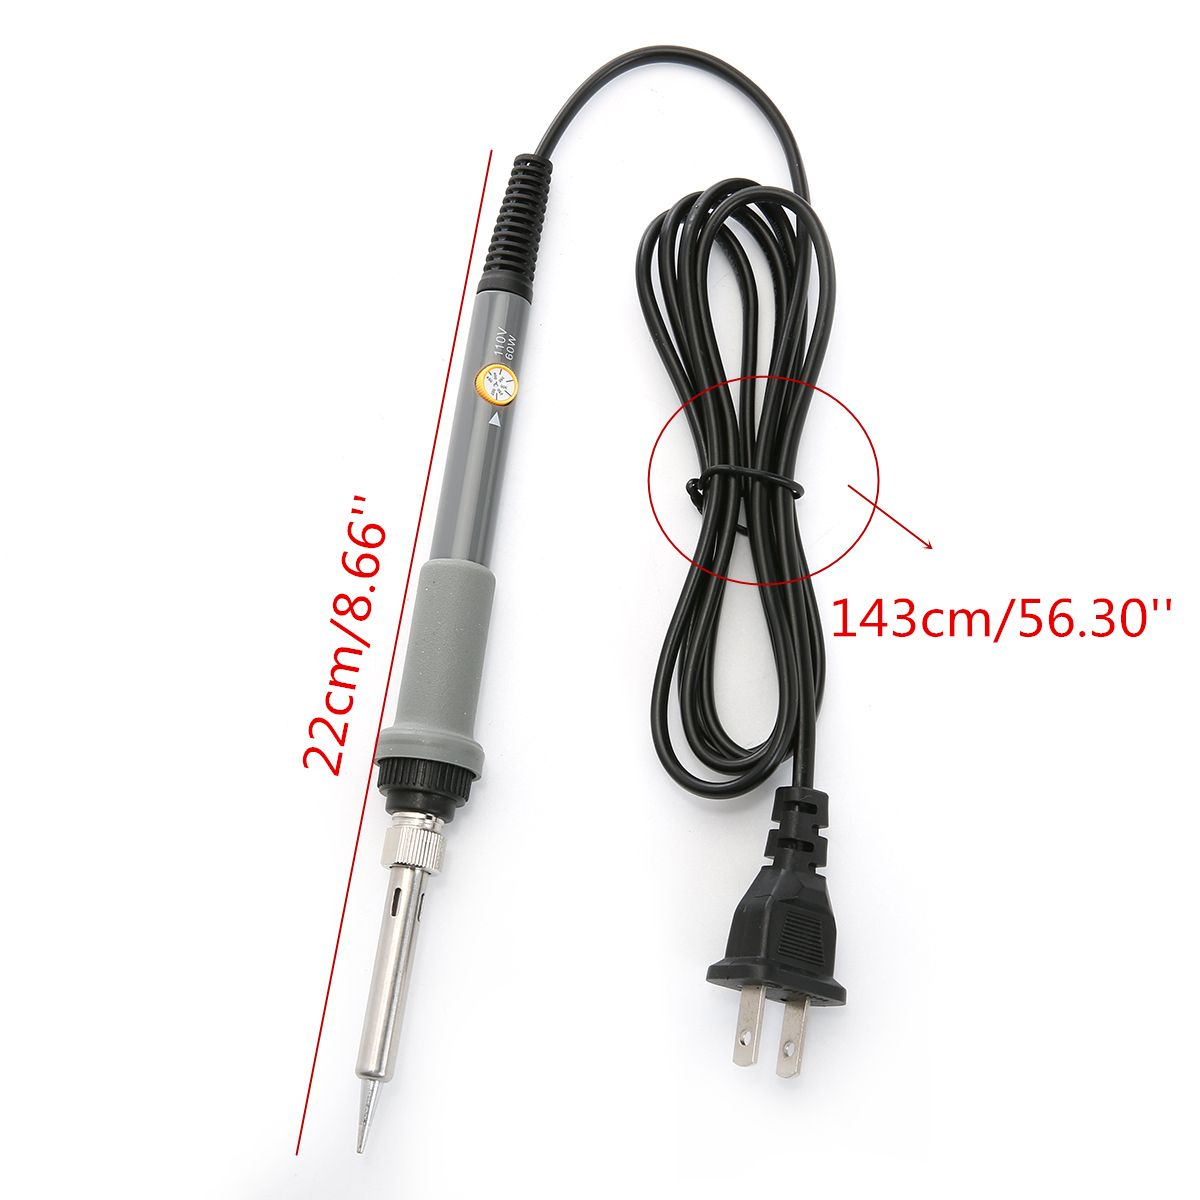 110V-Adjustable-Electric-Temperature-Welding-Solder-Iron-Tool-Solder-with-5Pcs-Tips-1299696